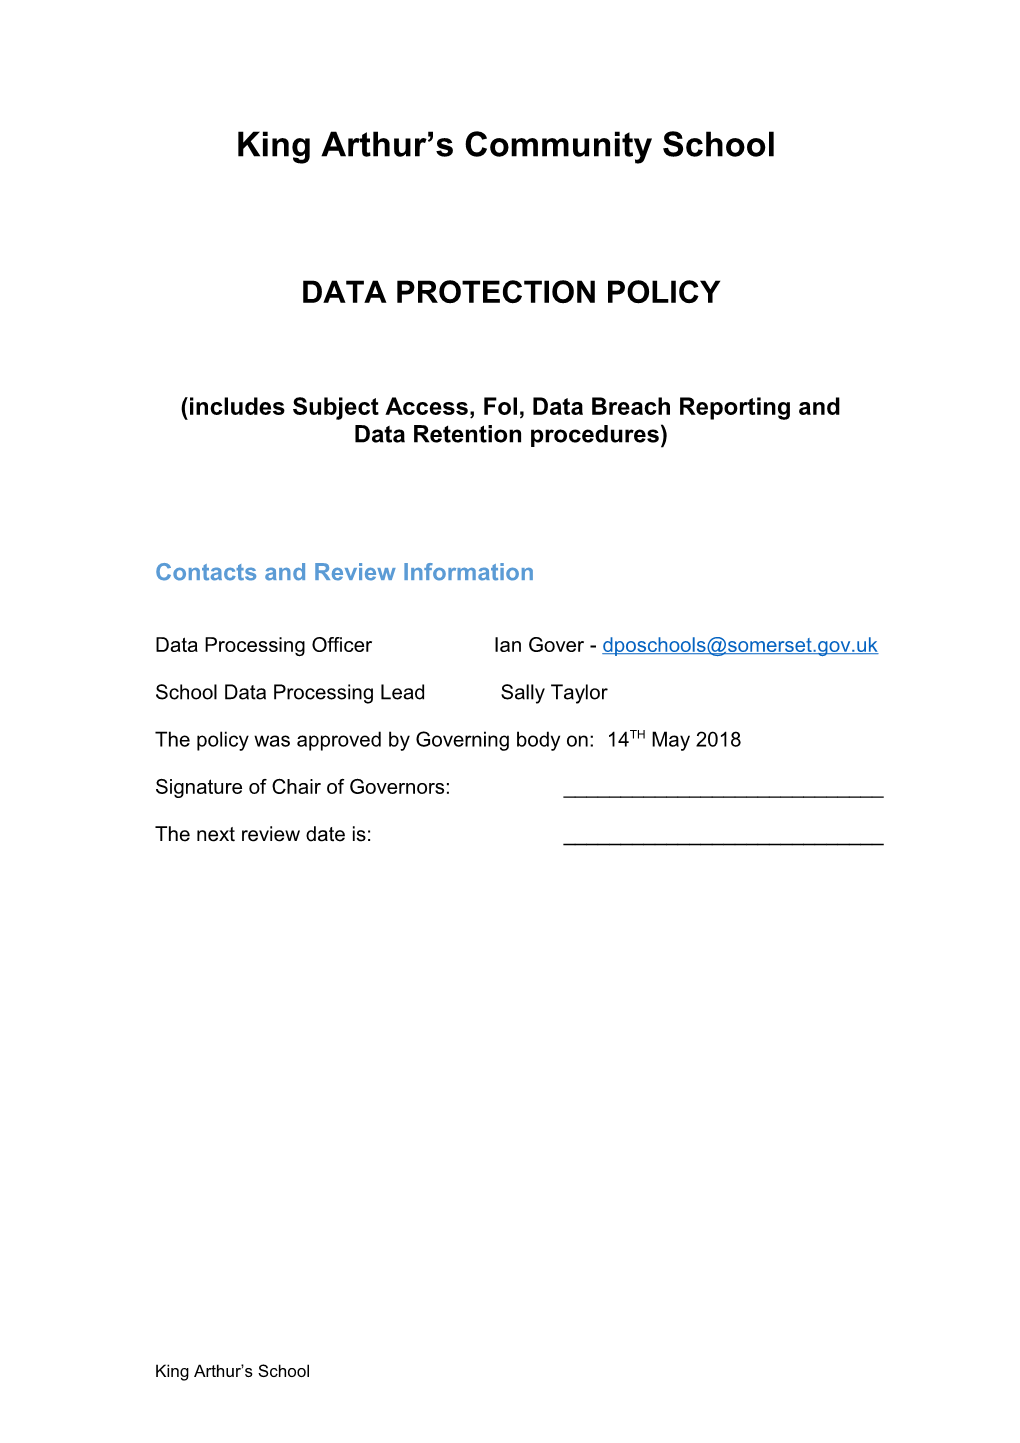 Model Data Protection Policy